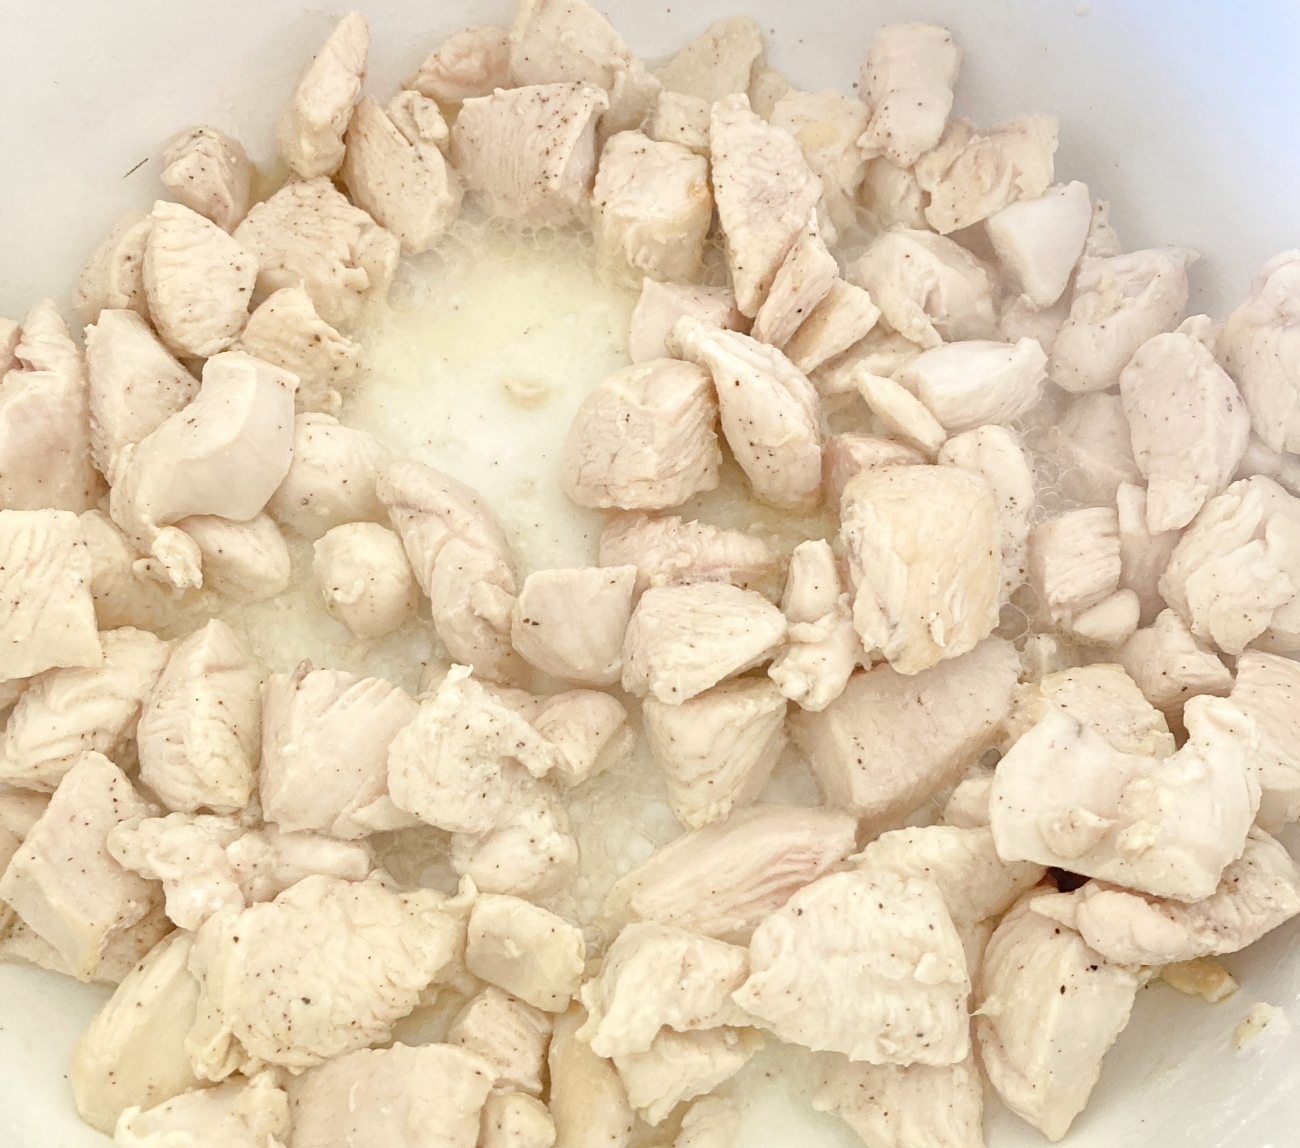 Heat oil in large wok or stockpot to medium. Add chicken and salt and pepper to taste. Cook until no longer pink outside, about 6 minutes. Increase heat to medium-high.